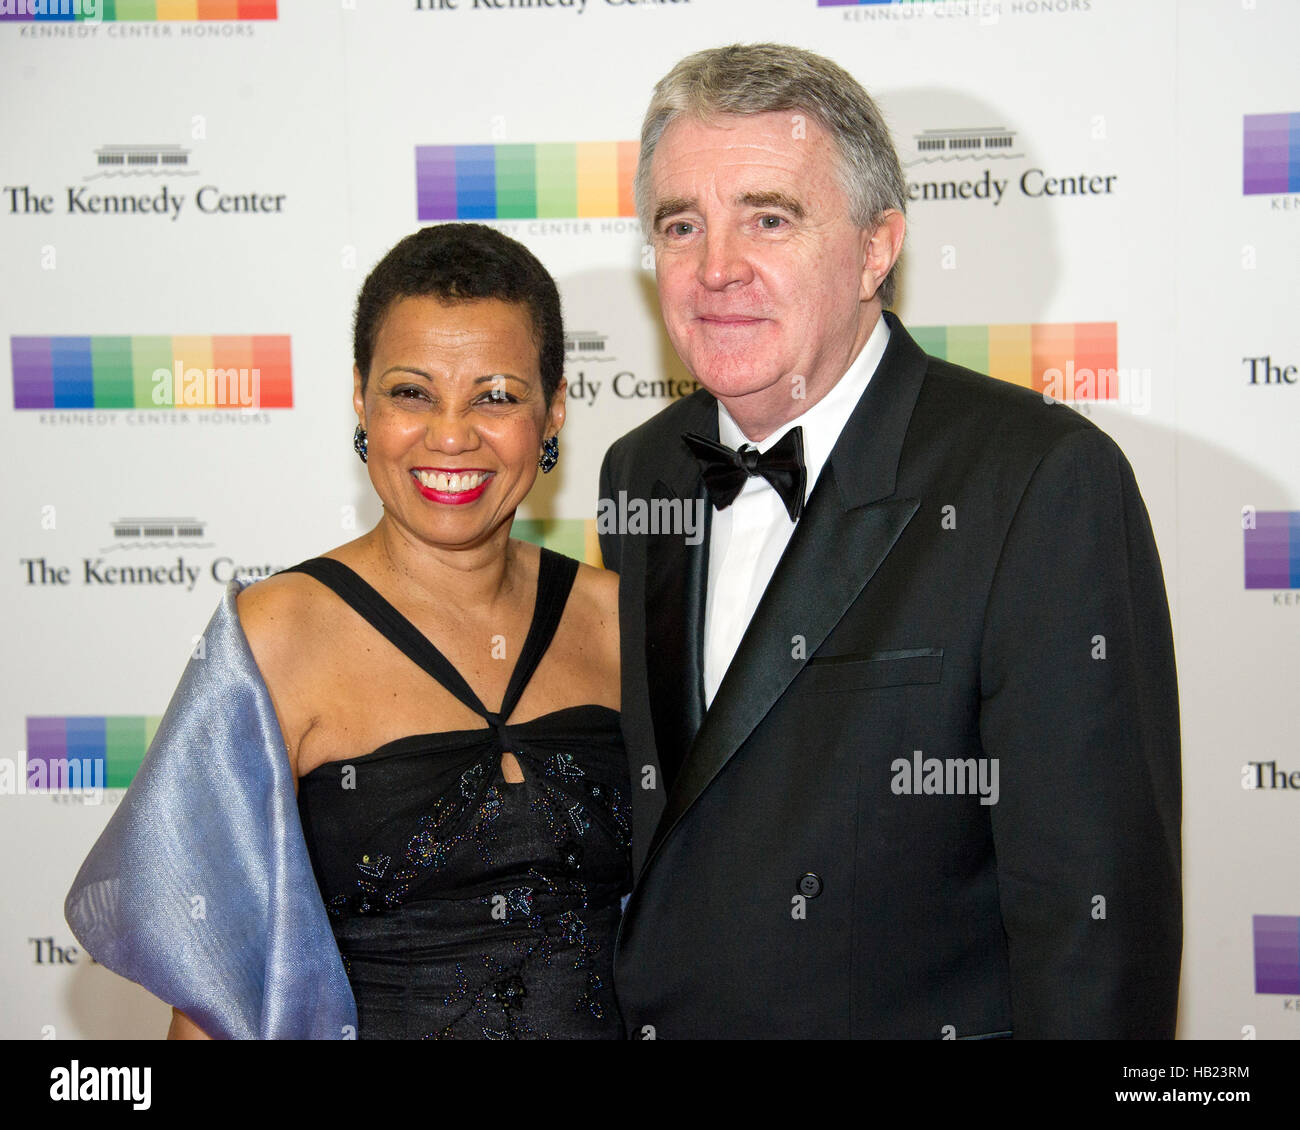 Washington DC, USA. 3rd Dec, 2016. Opera singer Harolyn Blackwell and Peter Greer arrive for the formal Artist's Dinner honoring the recipients of the 39th Annual Kennedy Center Honors hosted by United States Secretary of State John F. Kerry at the U.S. Department of State in Washington, DC on Saturday, December 3, 2016. The 2016 honorees are: Argentine pianist Martha Argerich; rock band the Eagles; screen and stage actor Al Pacino; gospel and blues singer Mavis Staples; and musician James Taylor. Credit:  MediaPunch Inc/Alamy Live News Stock Photo